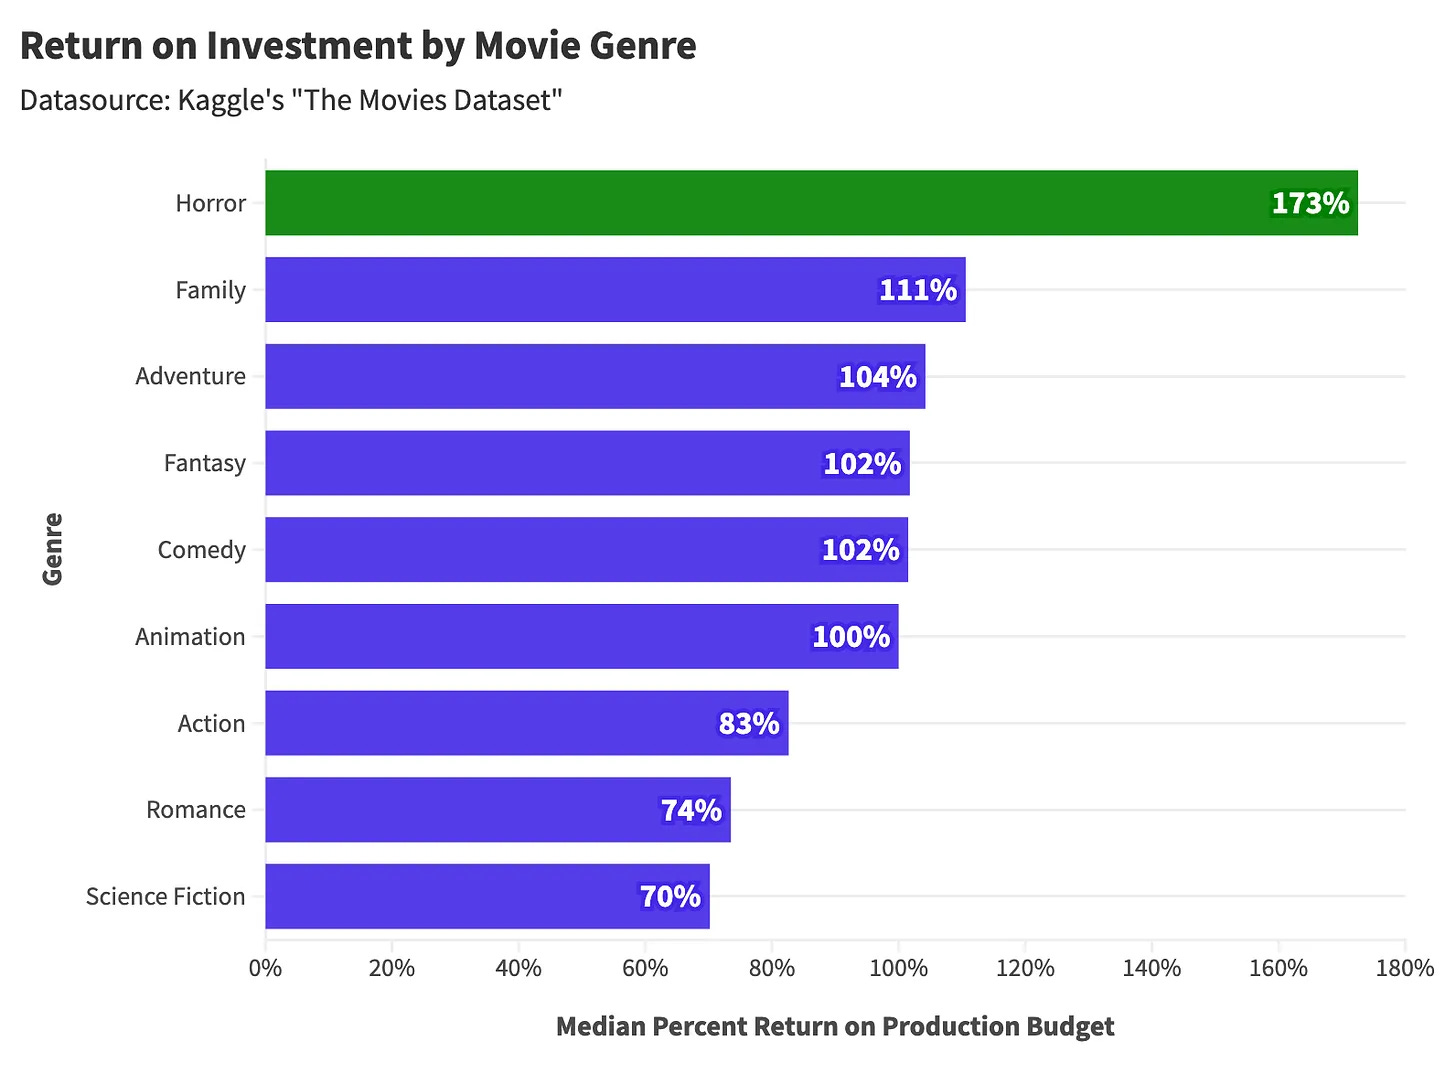 Chart showing high rate of return for horror films versus other genres